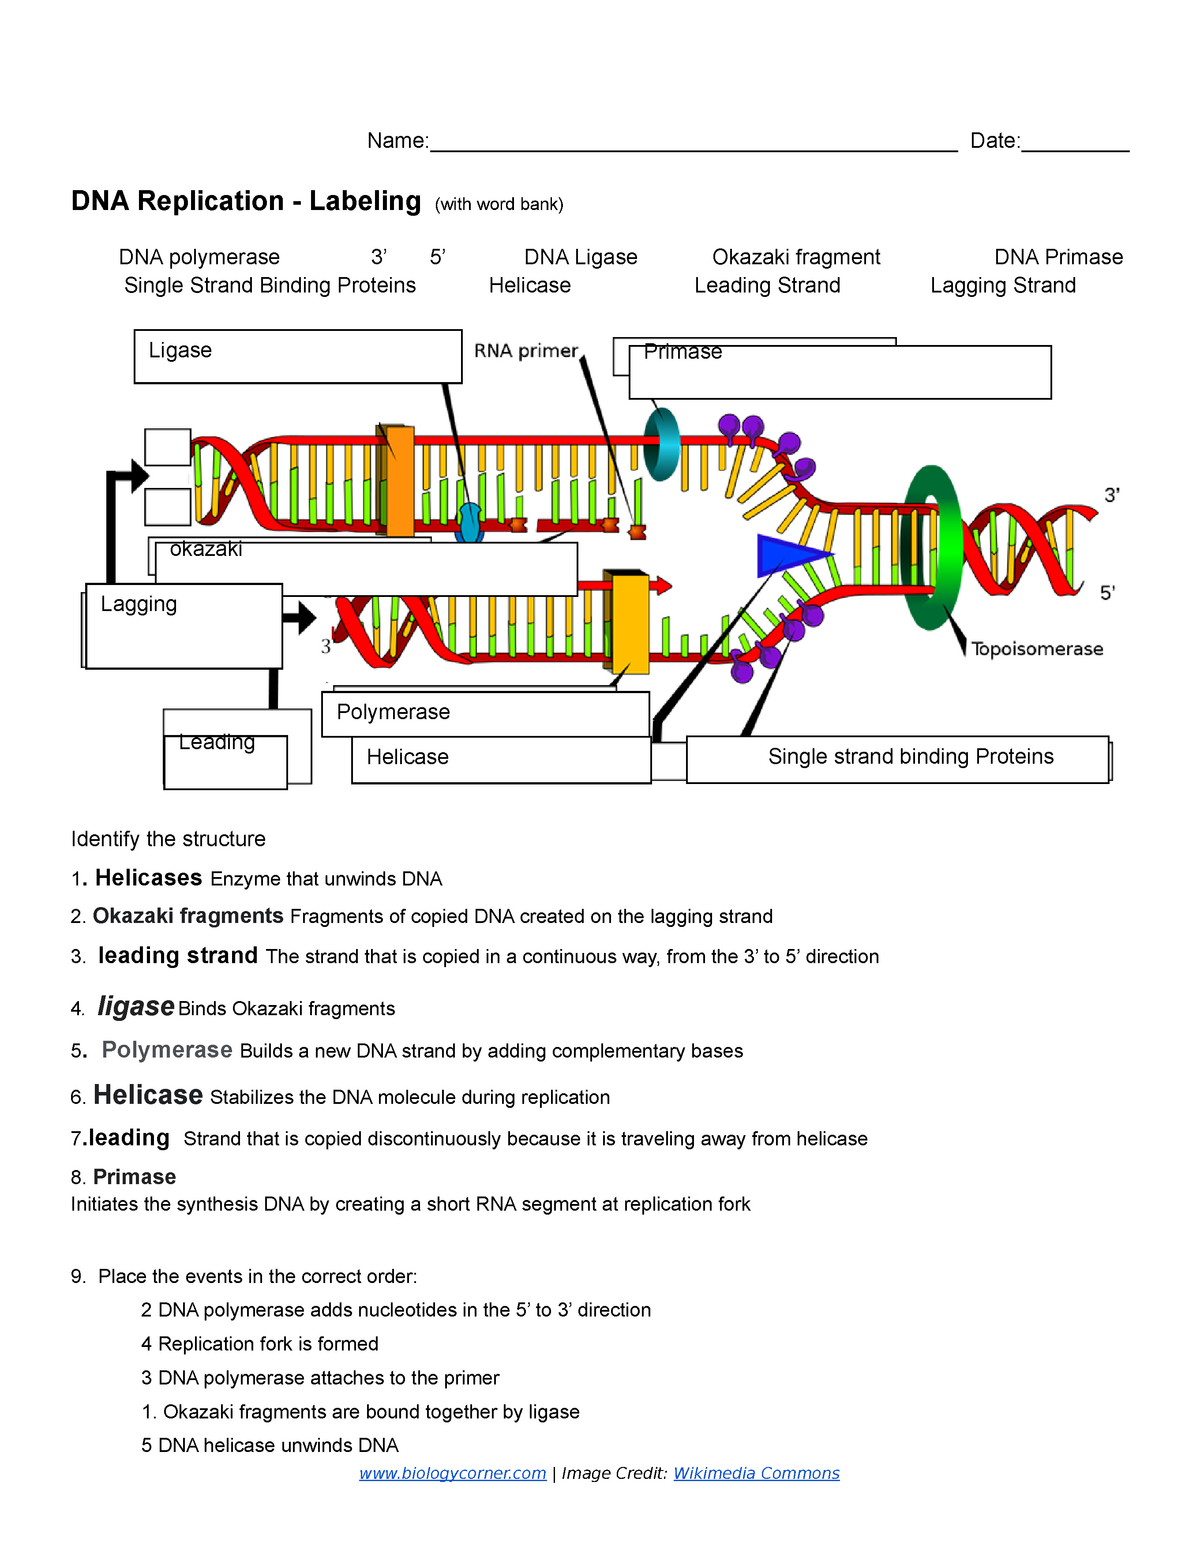 Copy of DNA Replication - Labeling 20 - Name: - StuDocu In Dna Replication Worksheet Answers